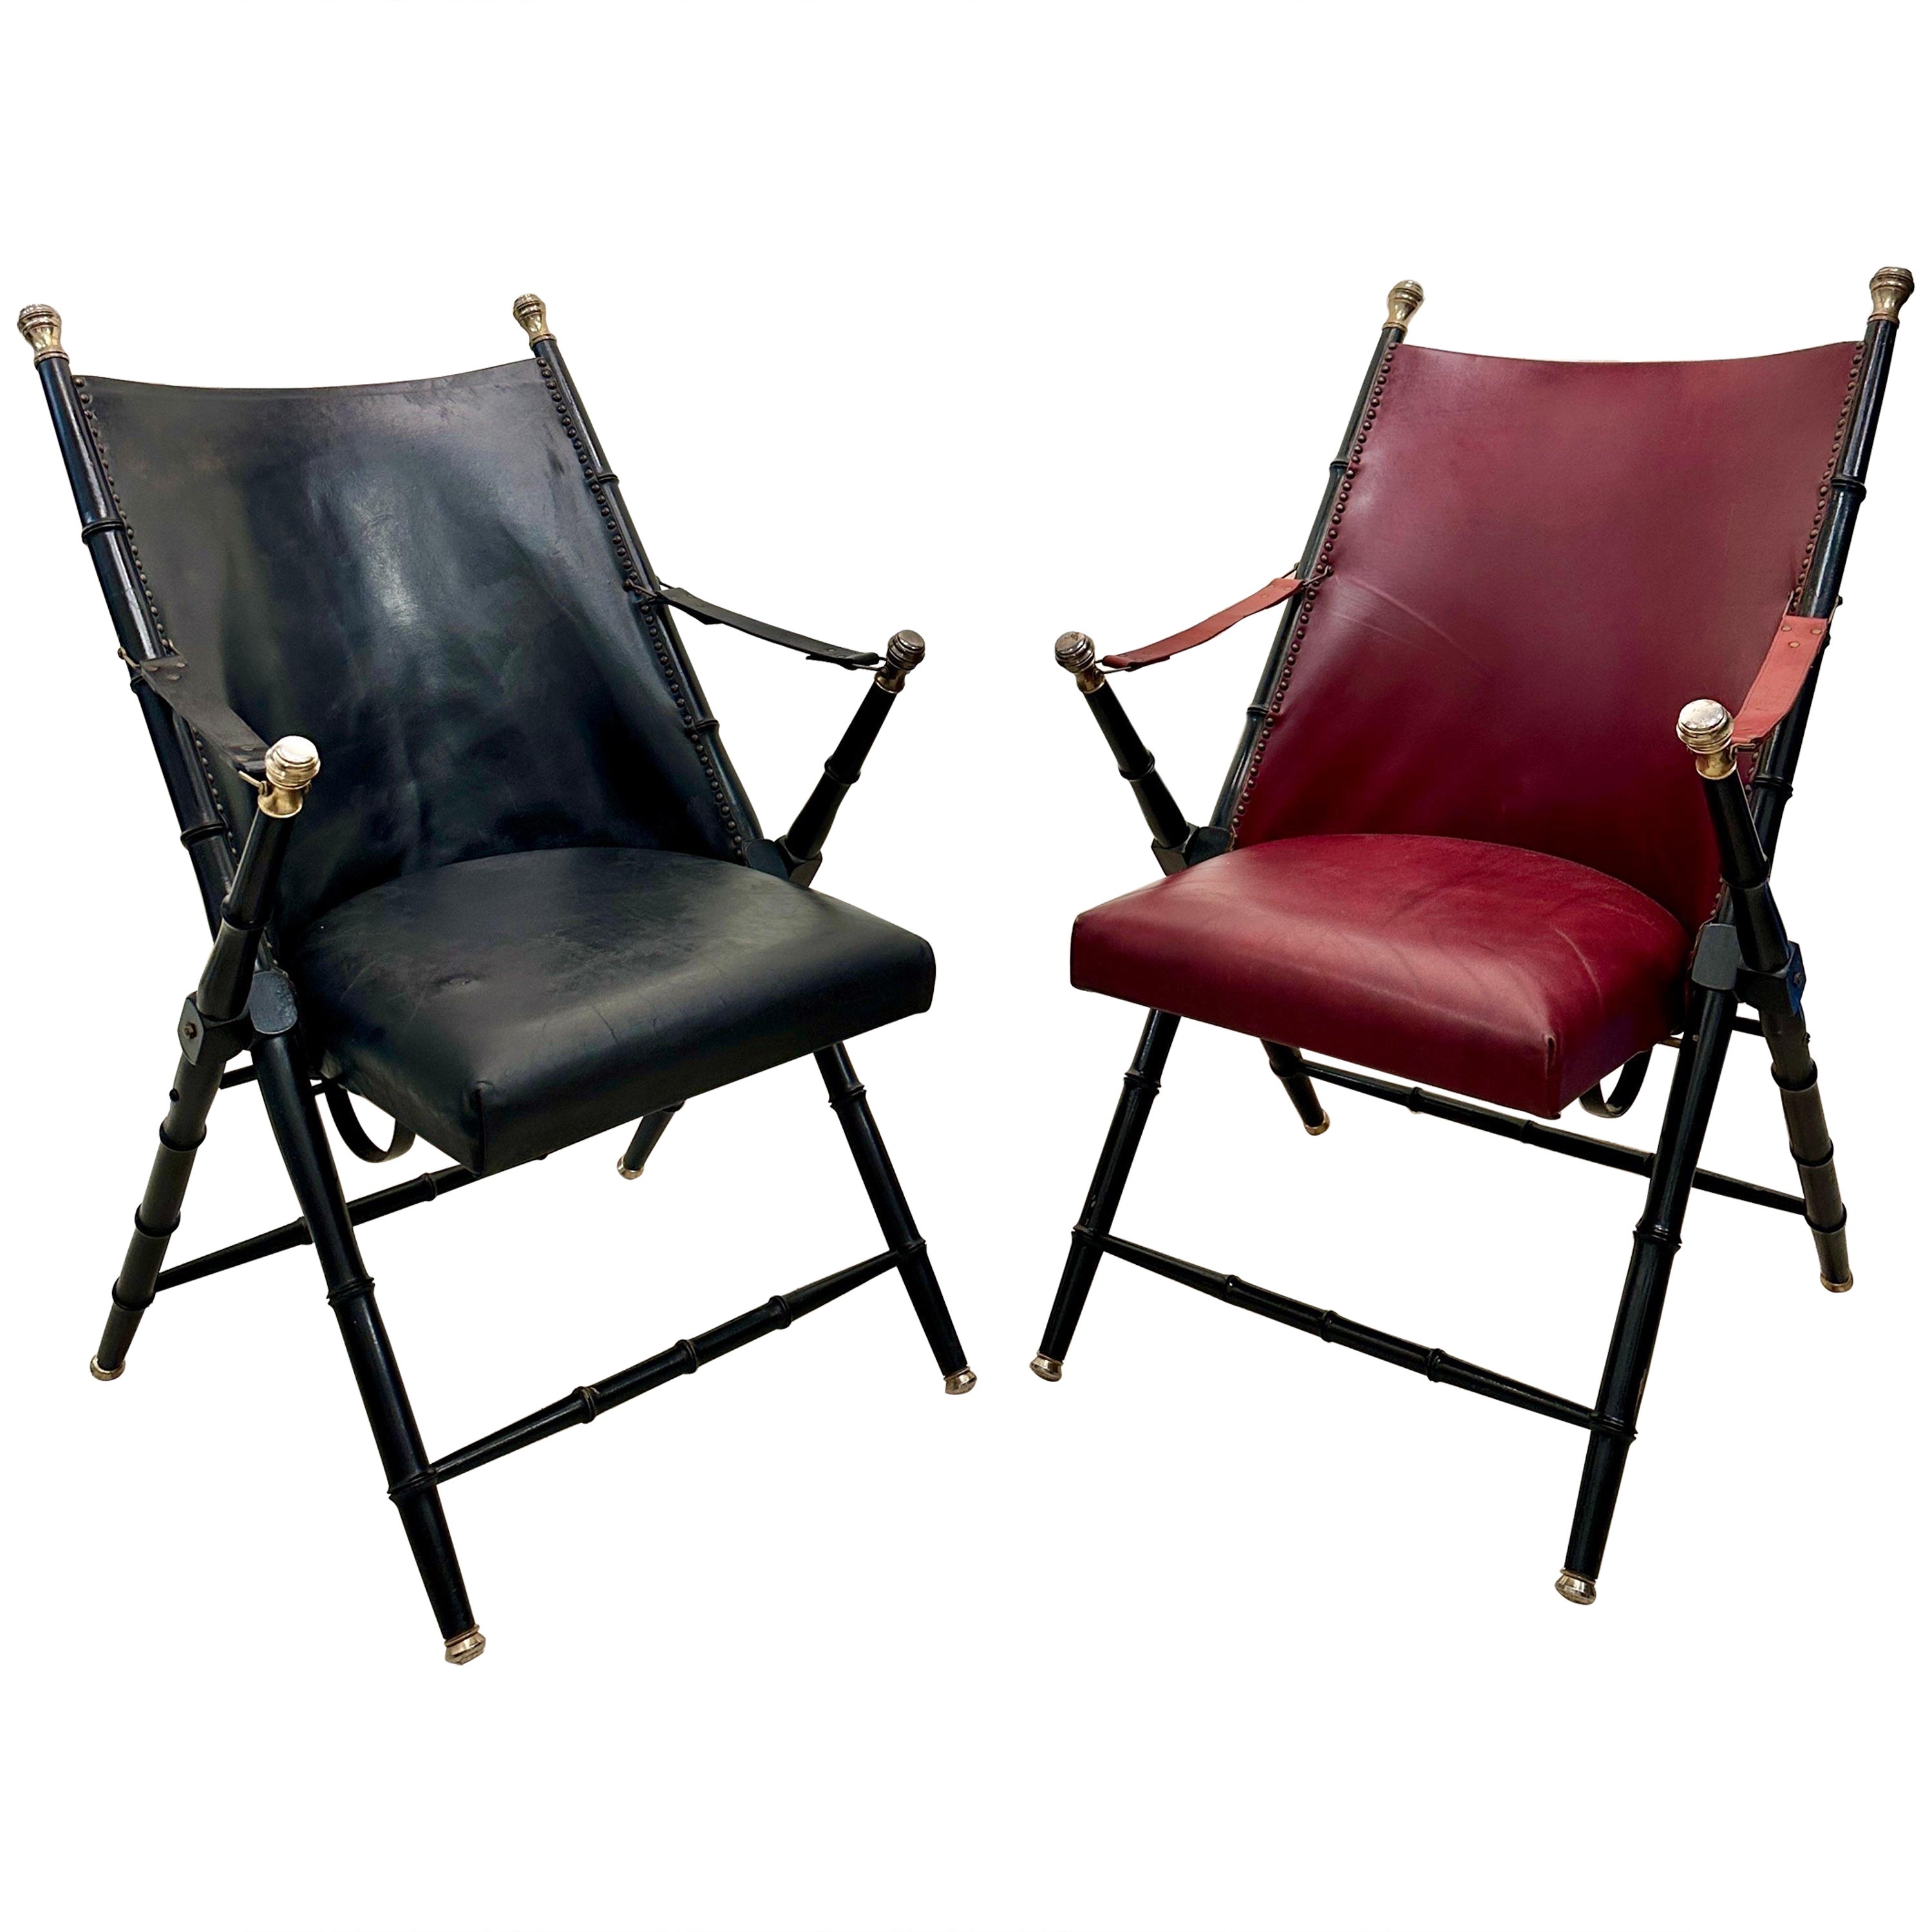 Pair of French Campaign-Style Leather Folding Chairs with Faux-Bamboo Frames